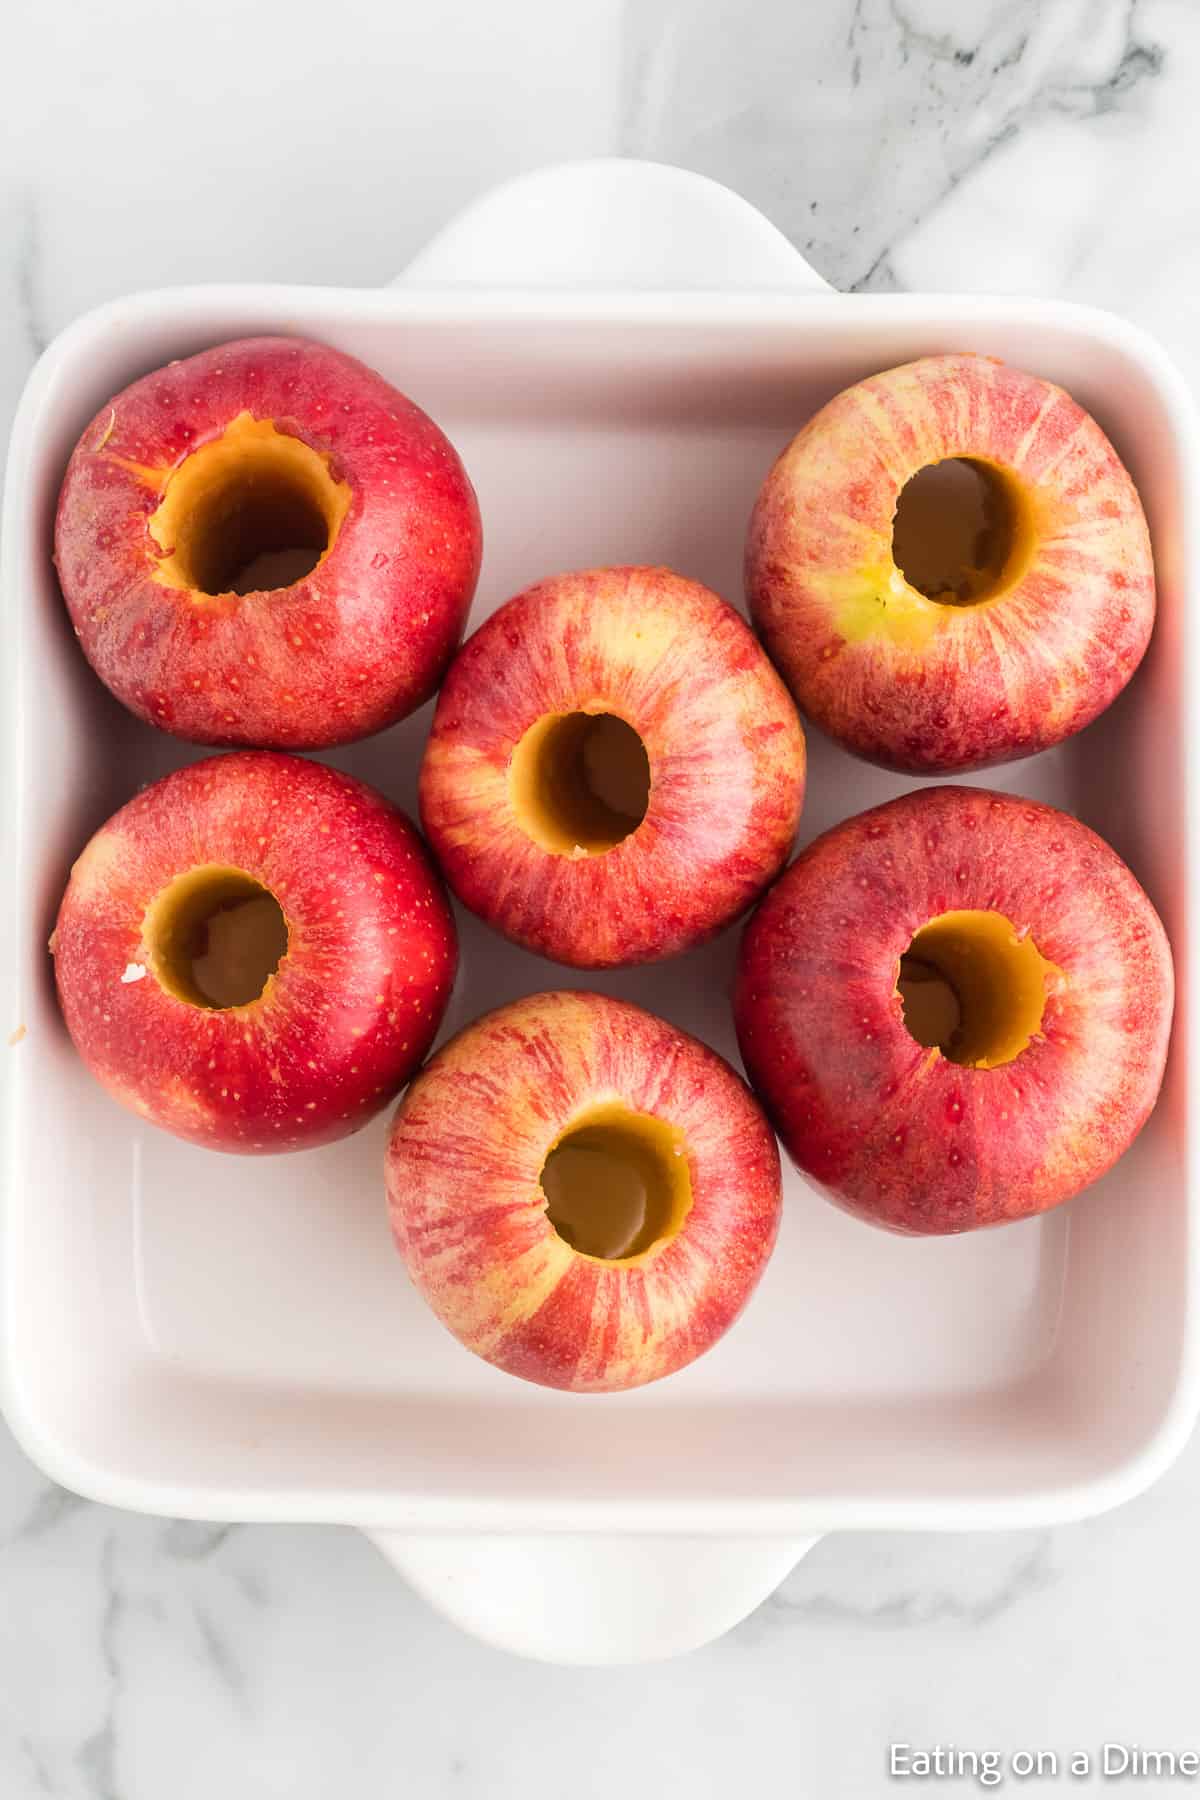 Placed core apples in a baking dish